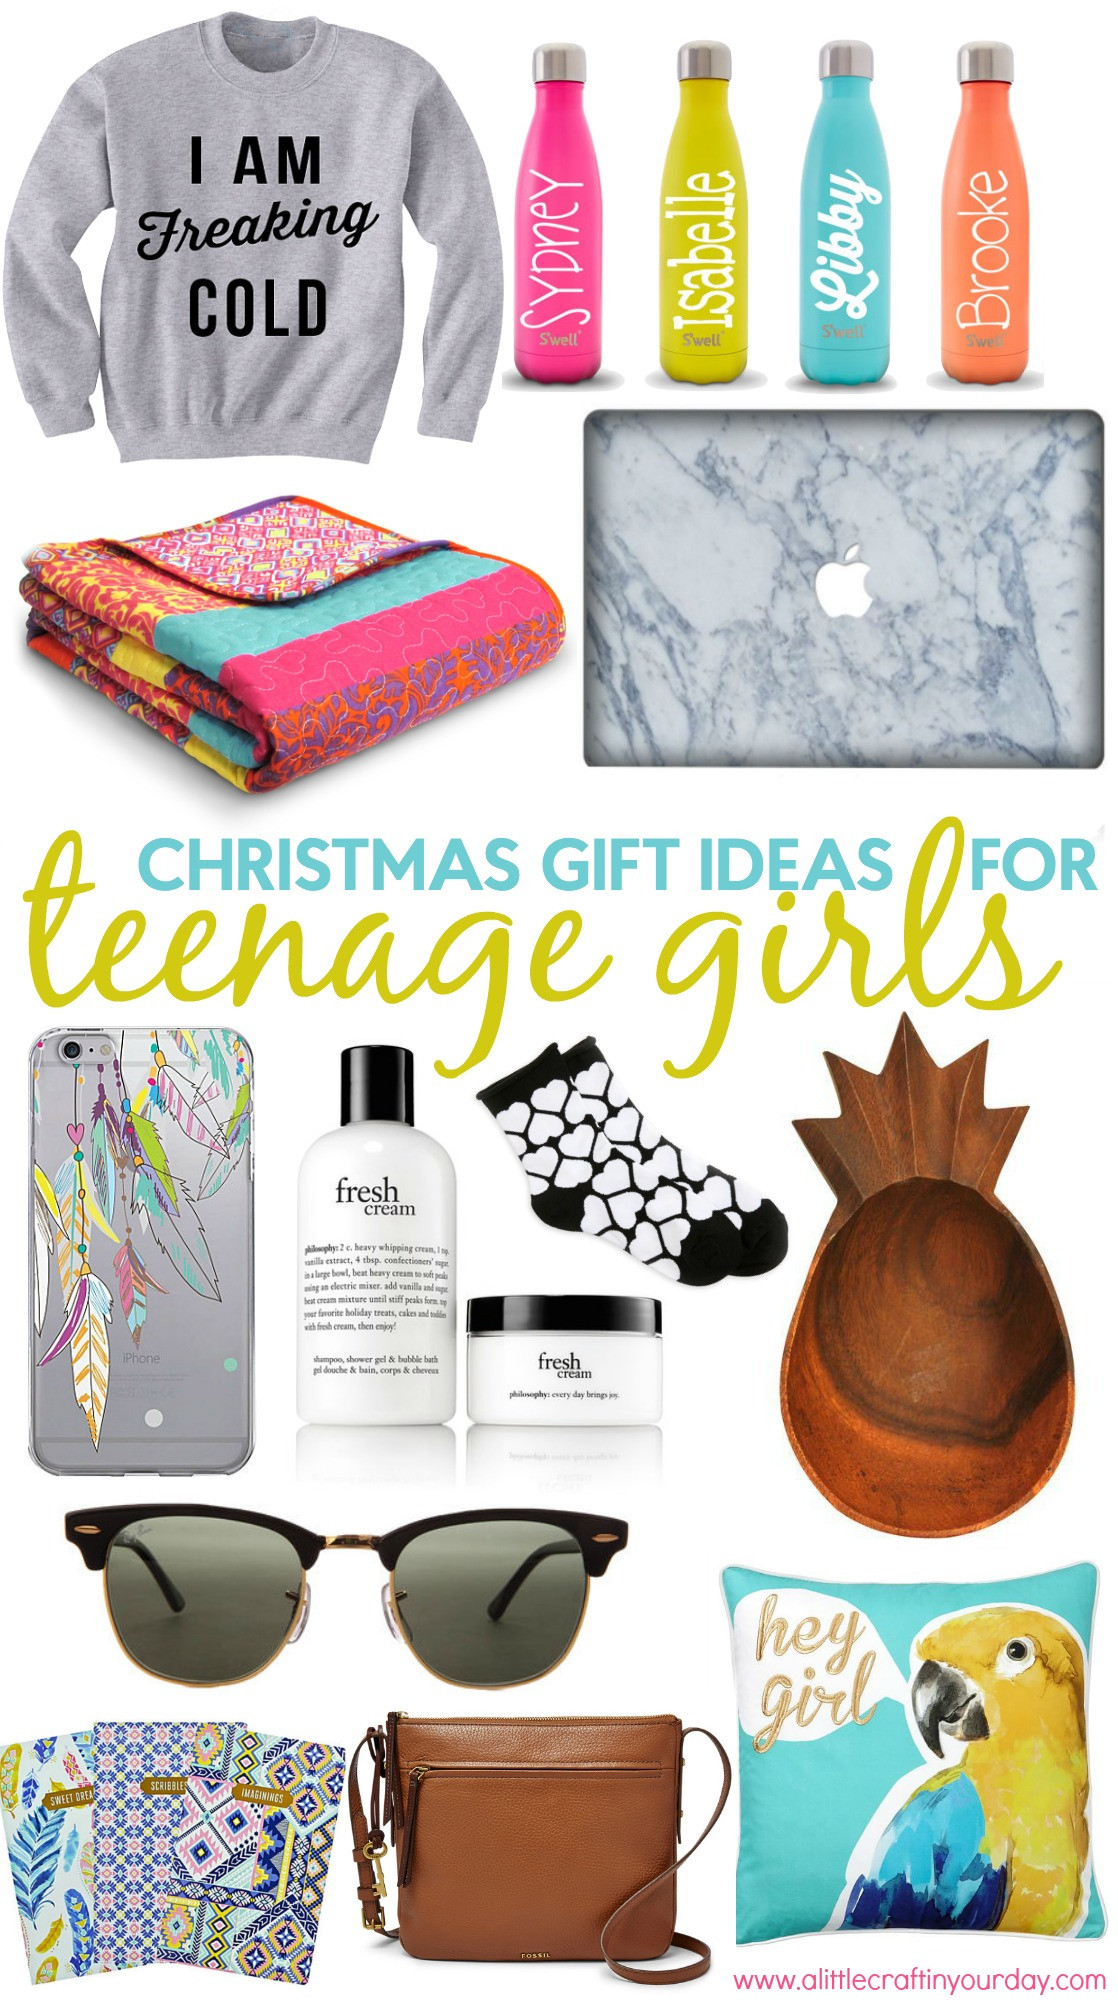 Christmas Gift Ideas For Tweens Girls
 Christmas Gift Ideas for Teen Girls A Little Craft In